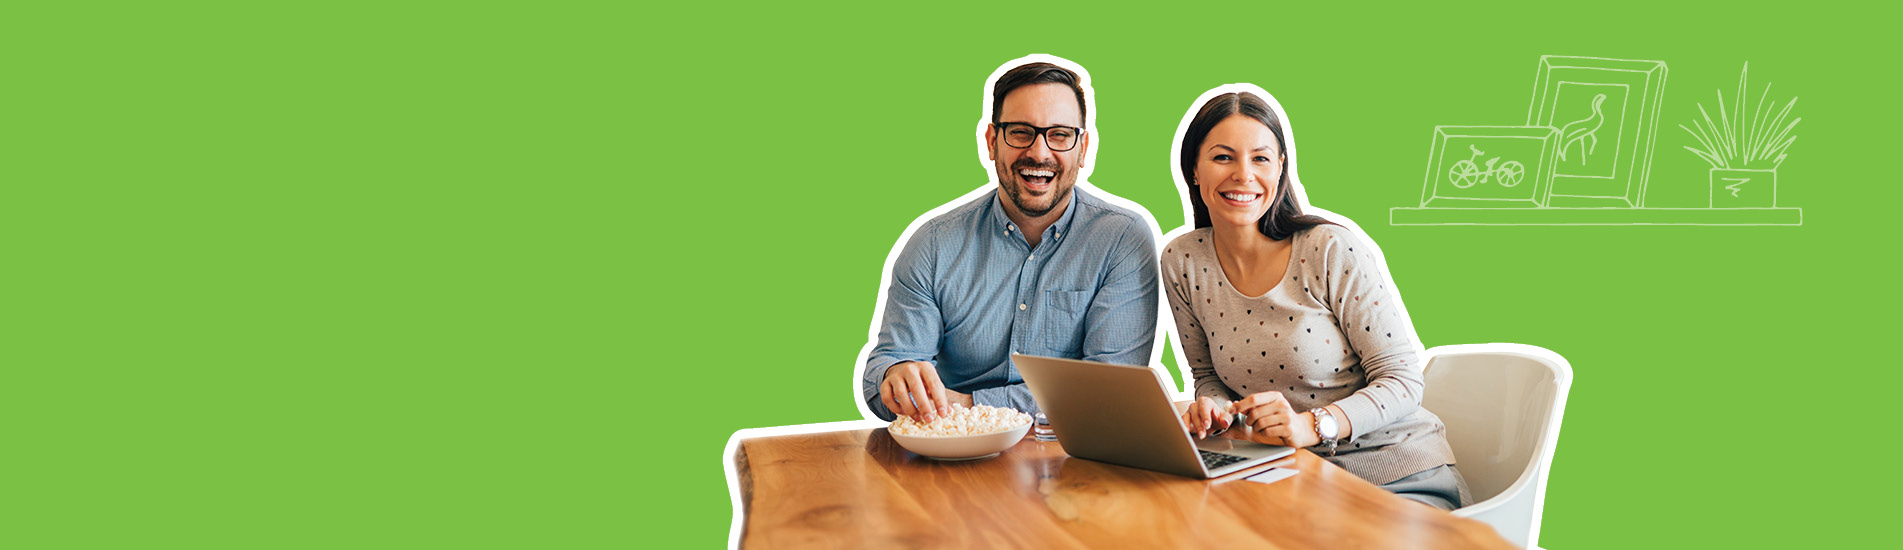 smiling couple  sitting at the table with their laptop.jpg